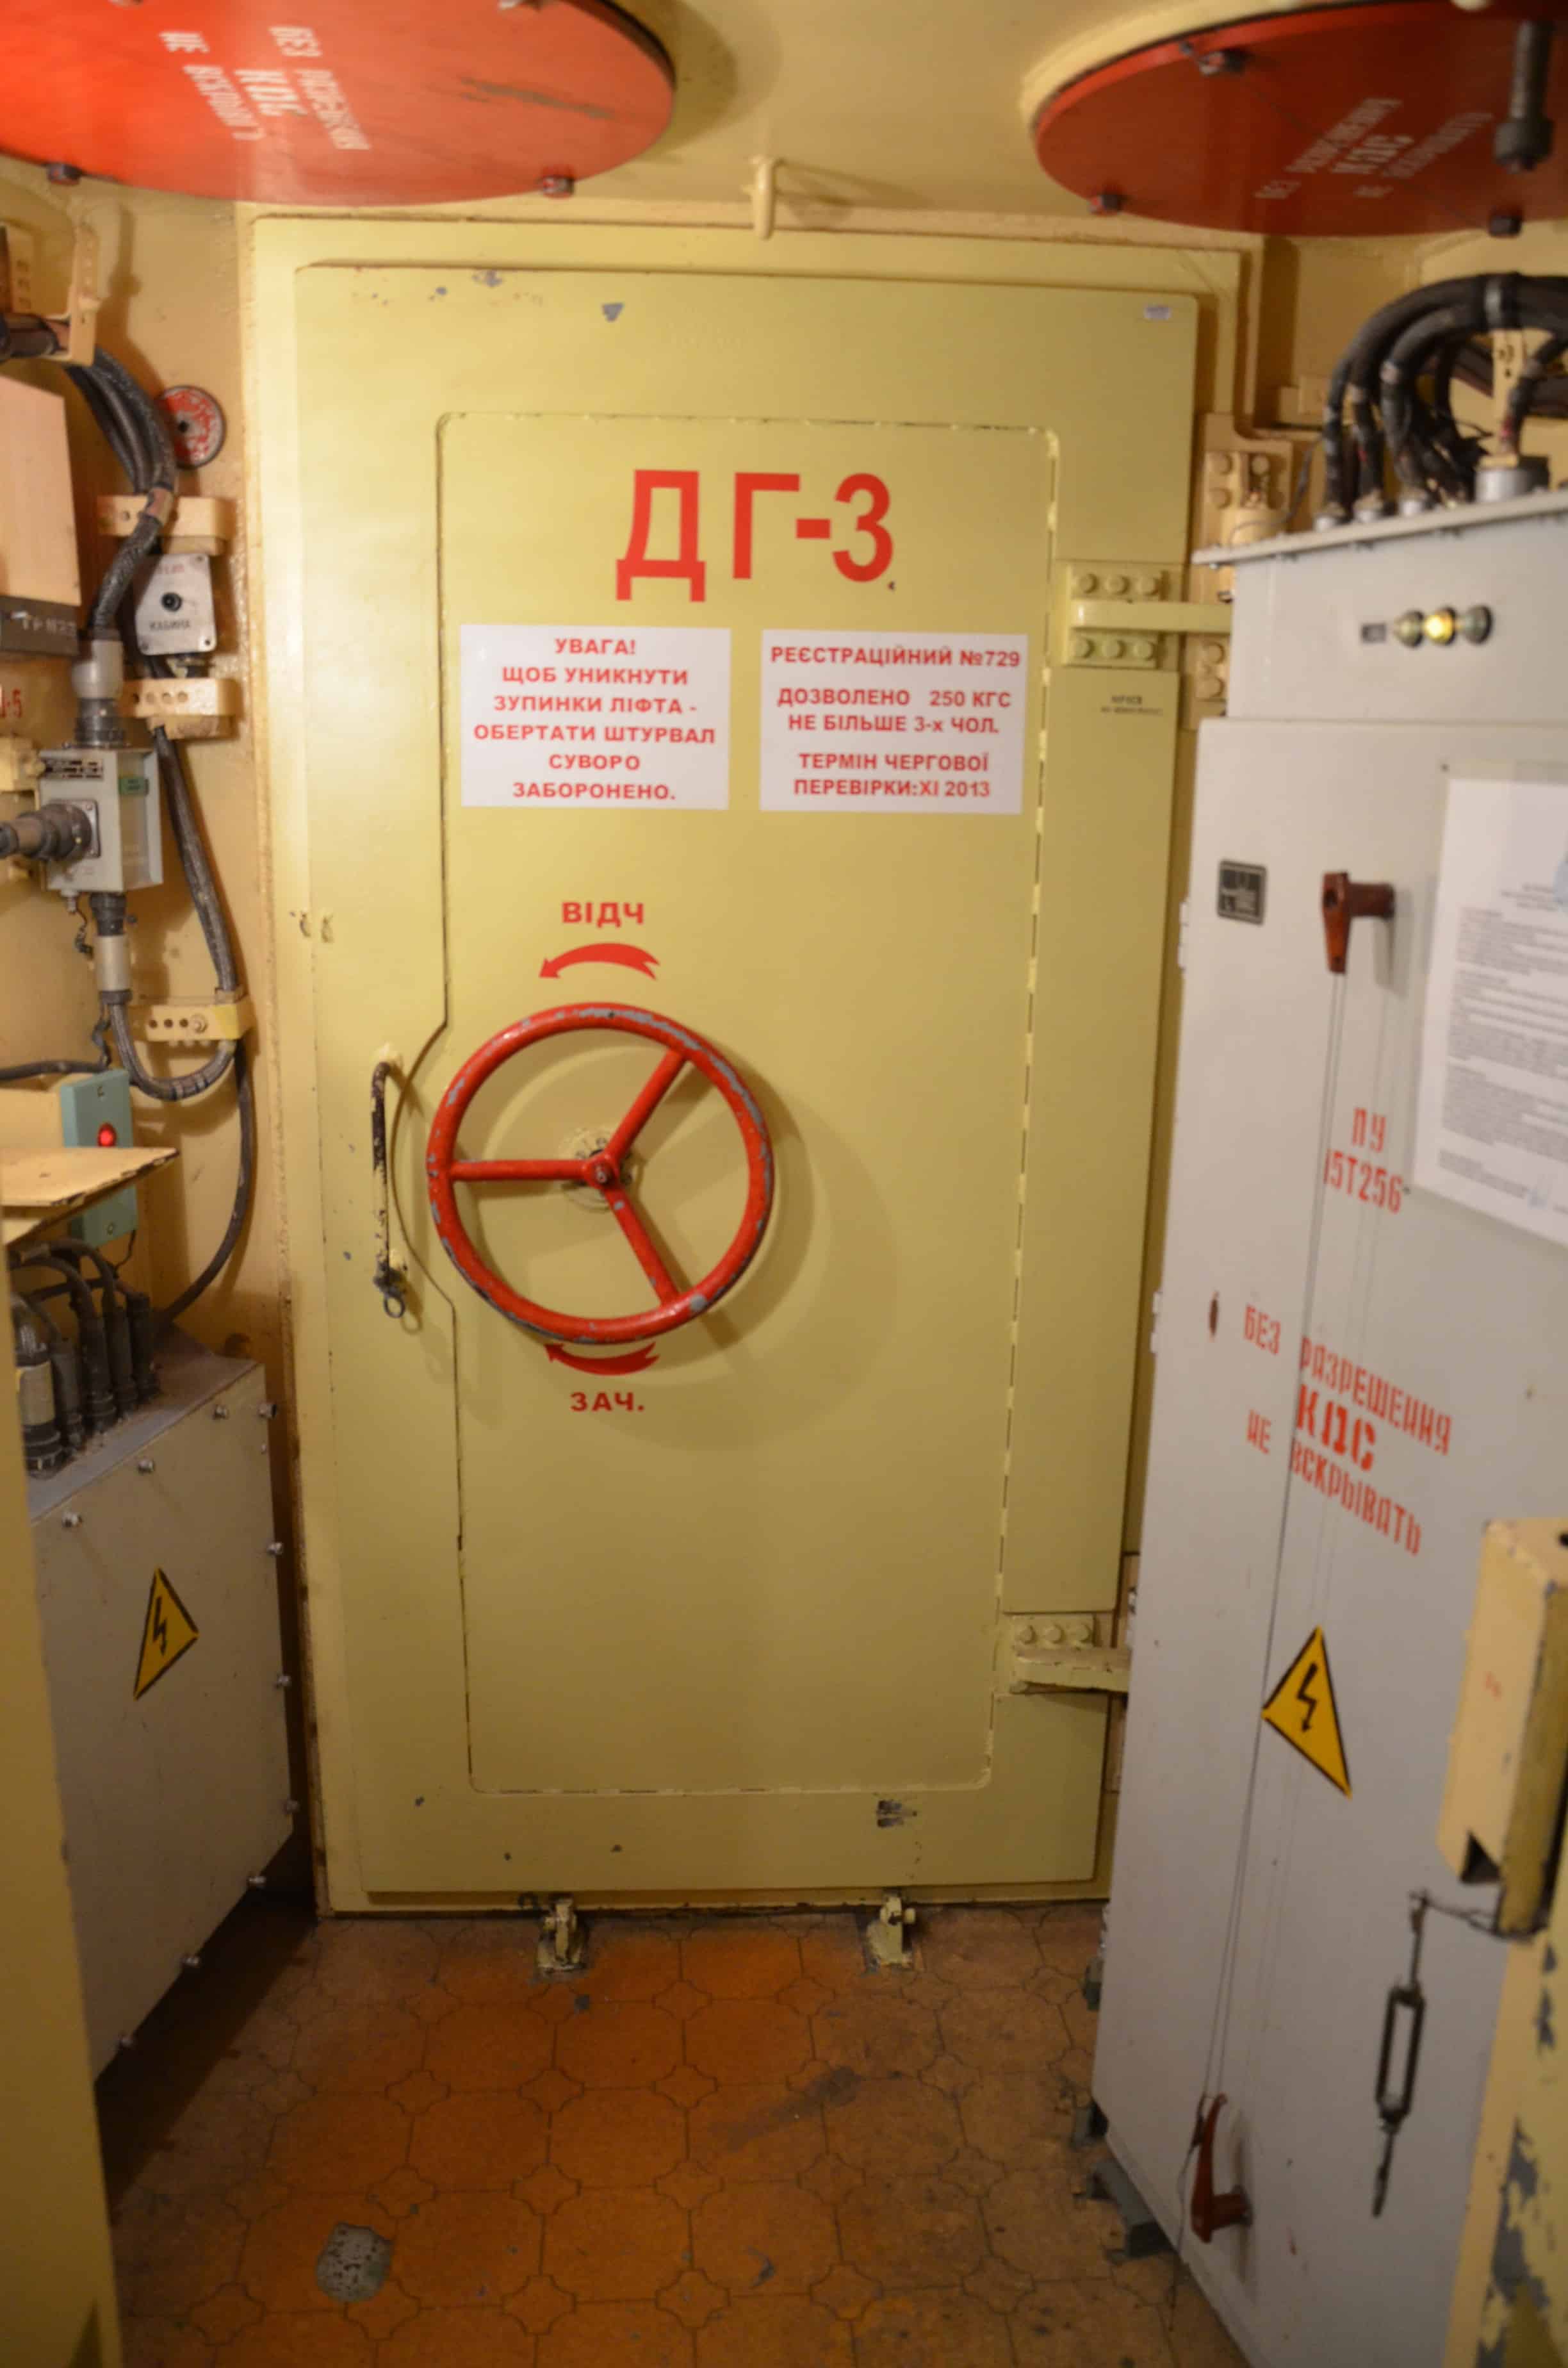 Door to the shaft in the Unified Command Post at Strategic Missile Forces Museum near Pobuzke, Ukraine